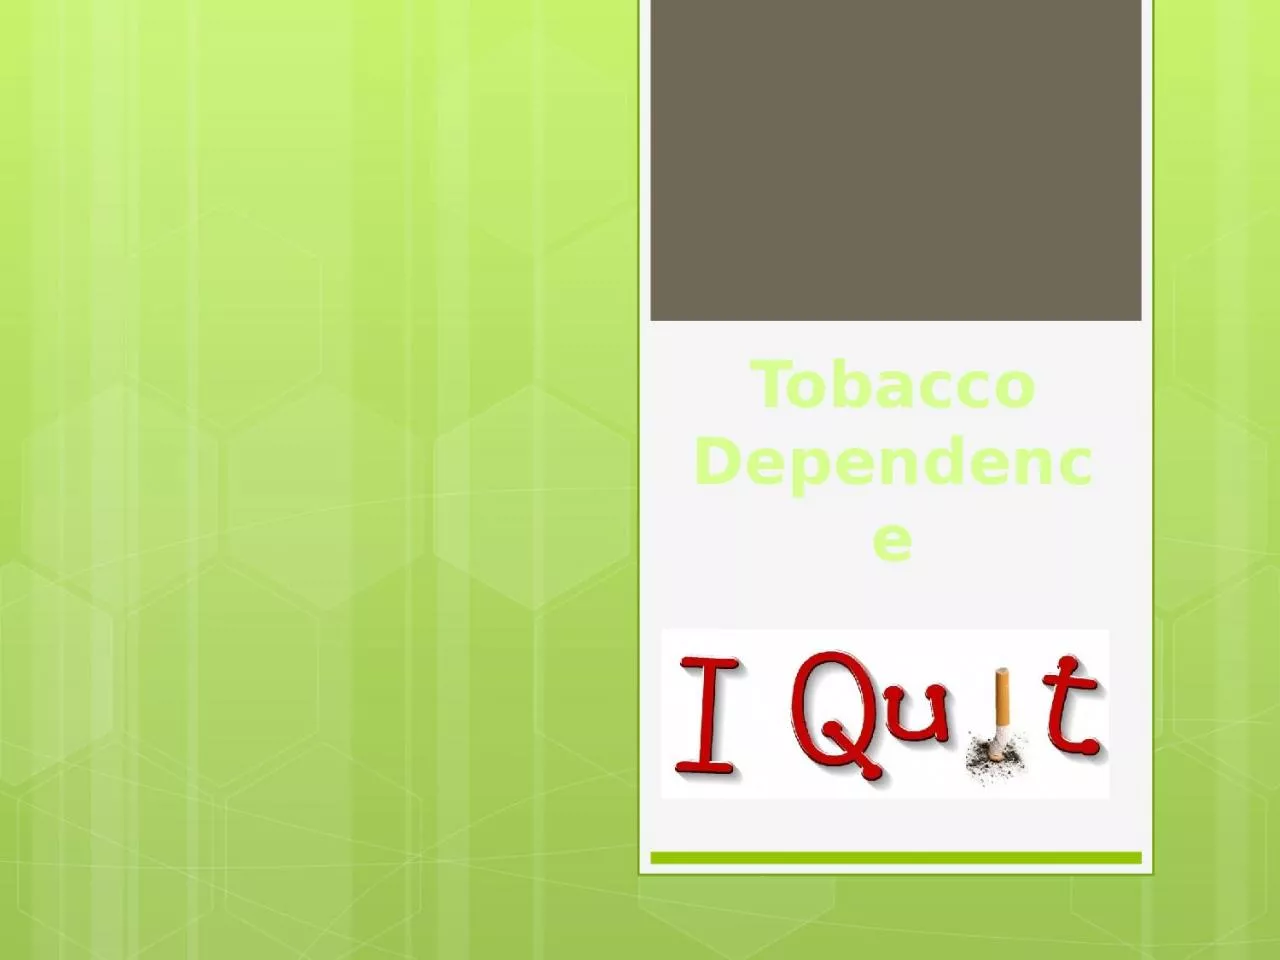 Tobacco Dependence Link Between Secondhand Smoke and Growth in CF Patients by:  Pulmonary